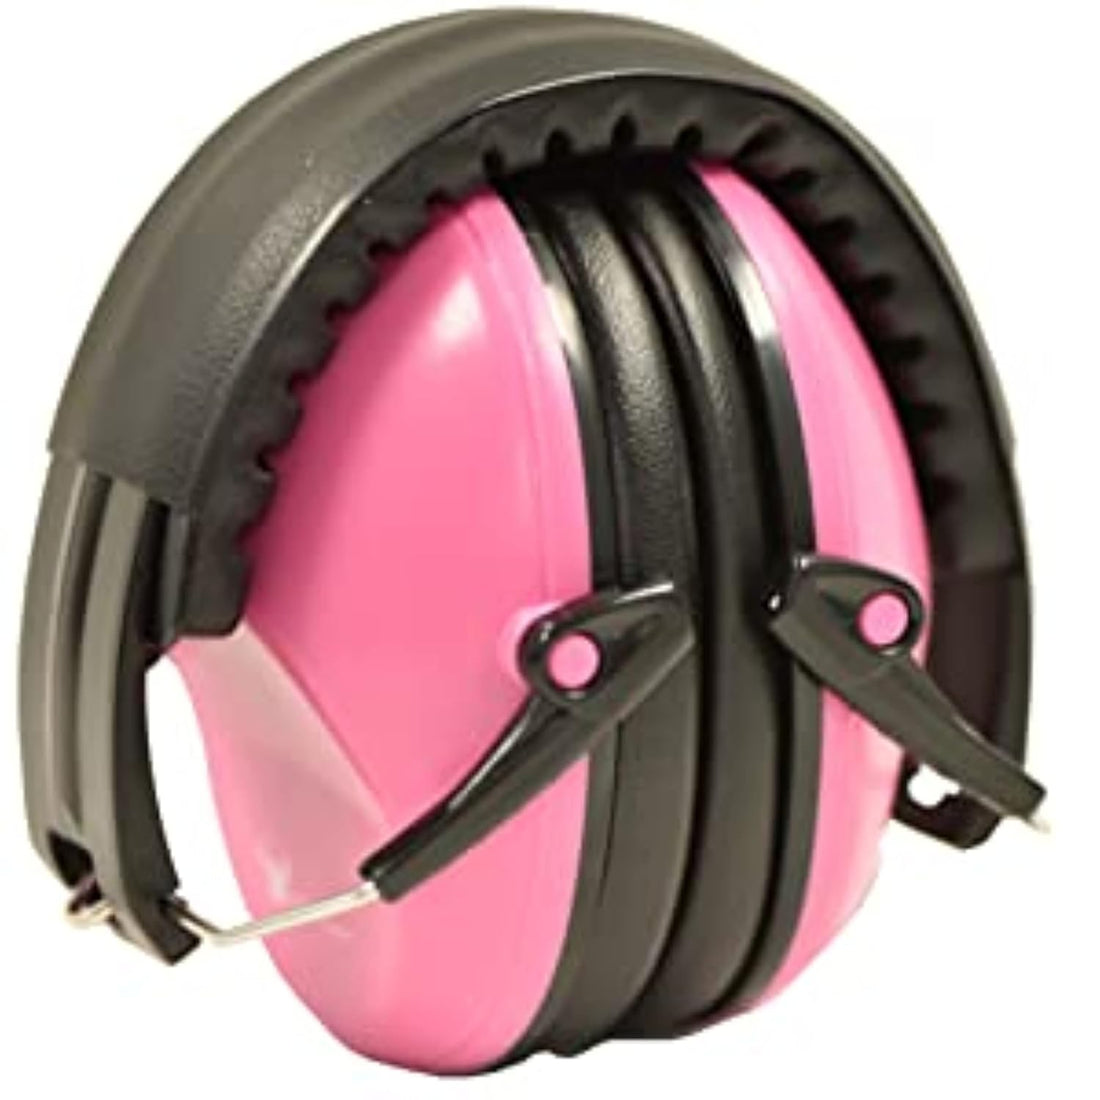 Earmuff Hearing Protection with Low Profile Passive Folding Design 26dB NRR and Reduces up to 125dB